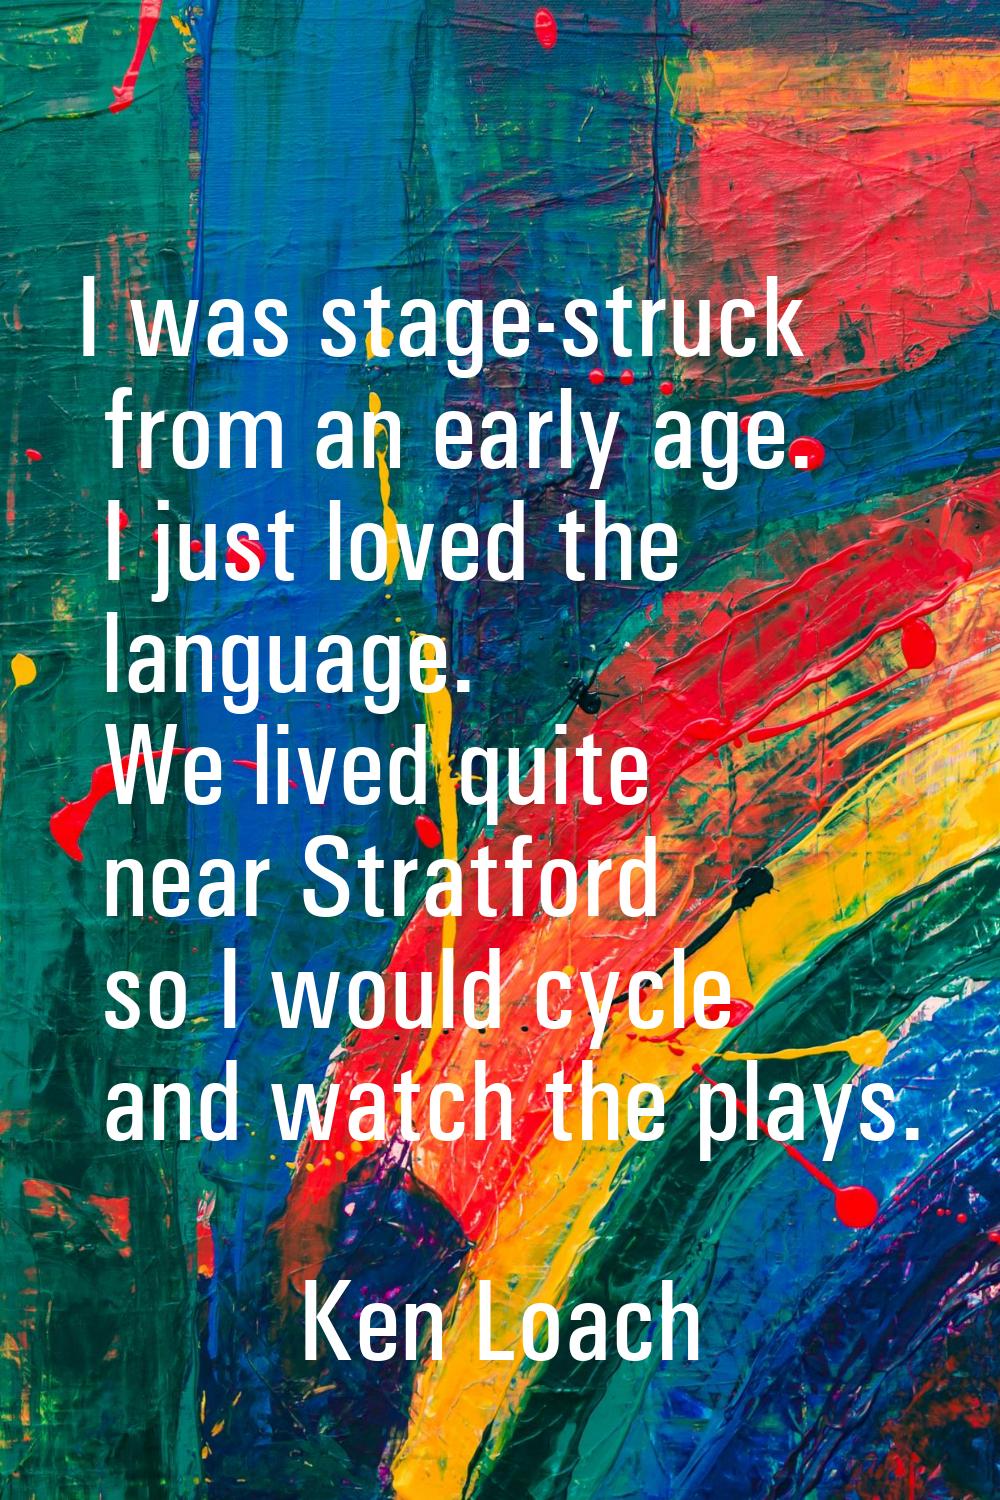 I was stage-struck from an early age. I just loved the language. We lived quite near Stratford so I